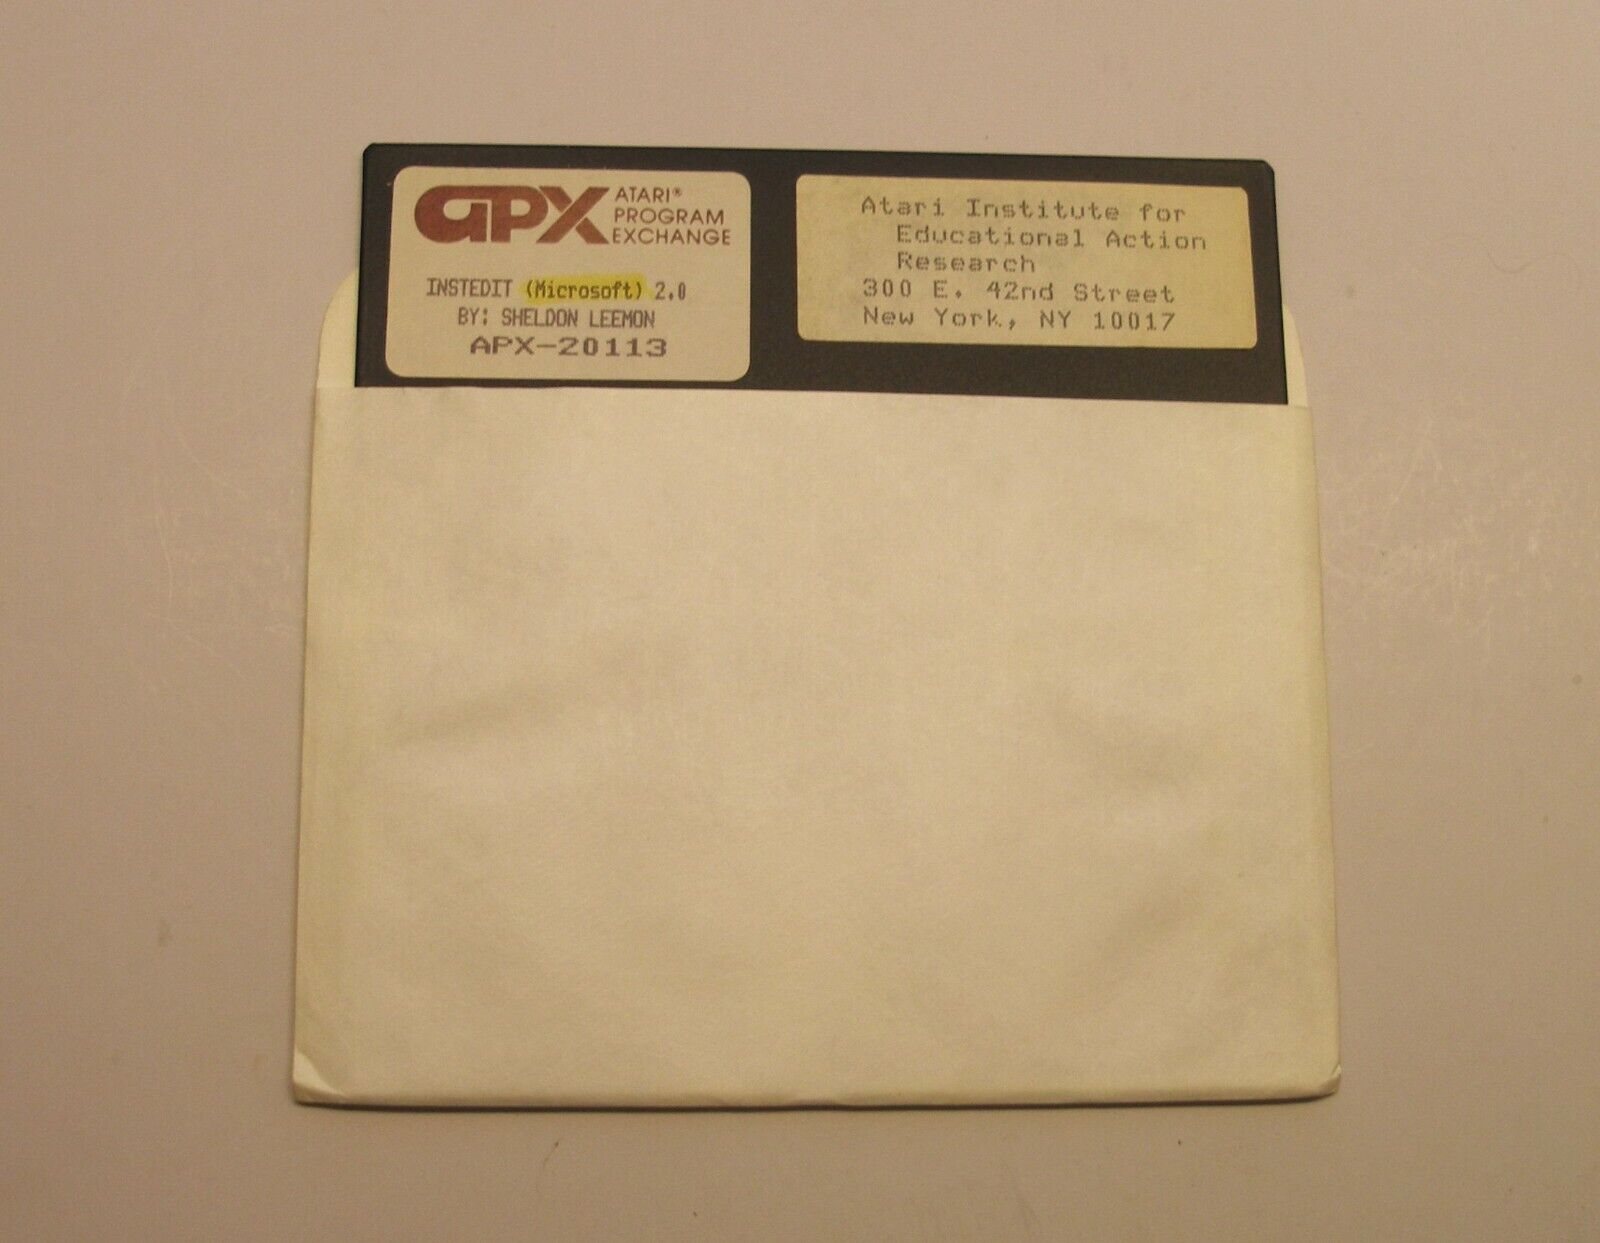 VERY RARE (9) Original Disk of INSTEDIT (MS BASIC) by APX for Atari 400/800